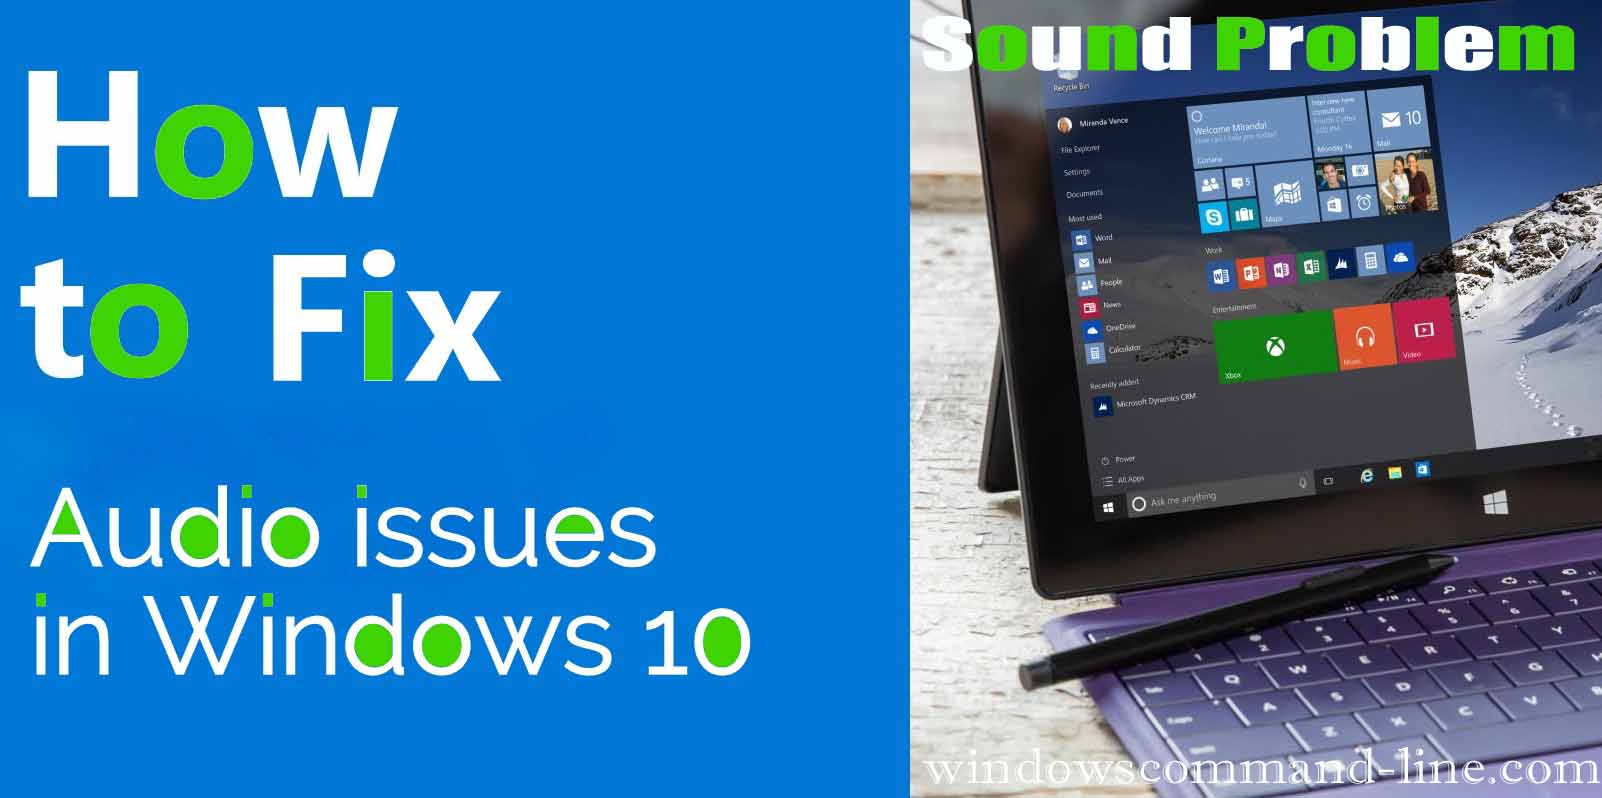 How to Fix Sound Problem in Windows 10, 8.1, 7